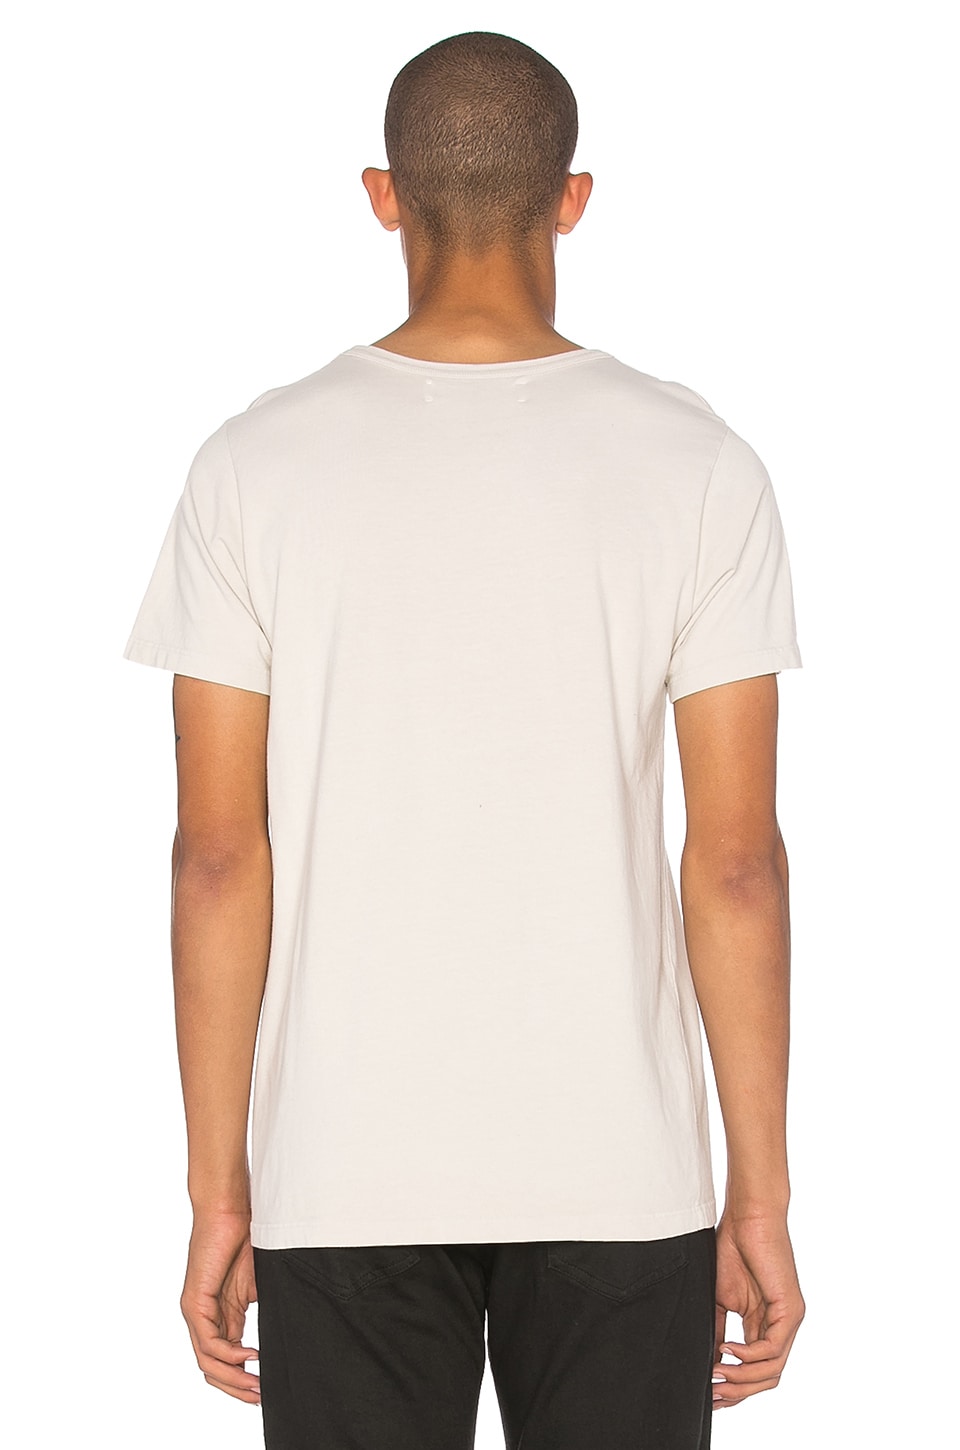 Herman Wasted Youth SST Washed Tee in Washed Natural | REVOLVE